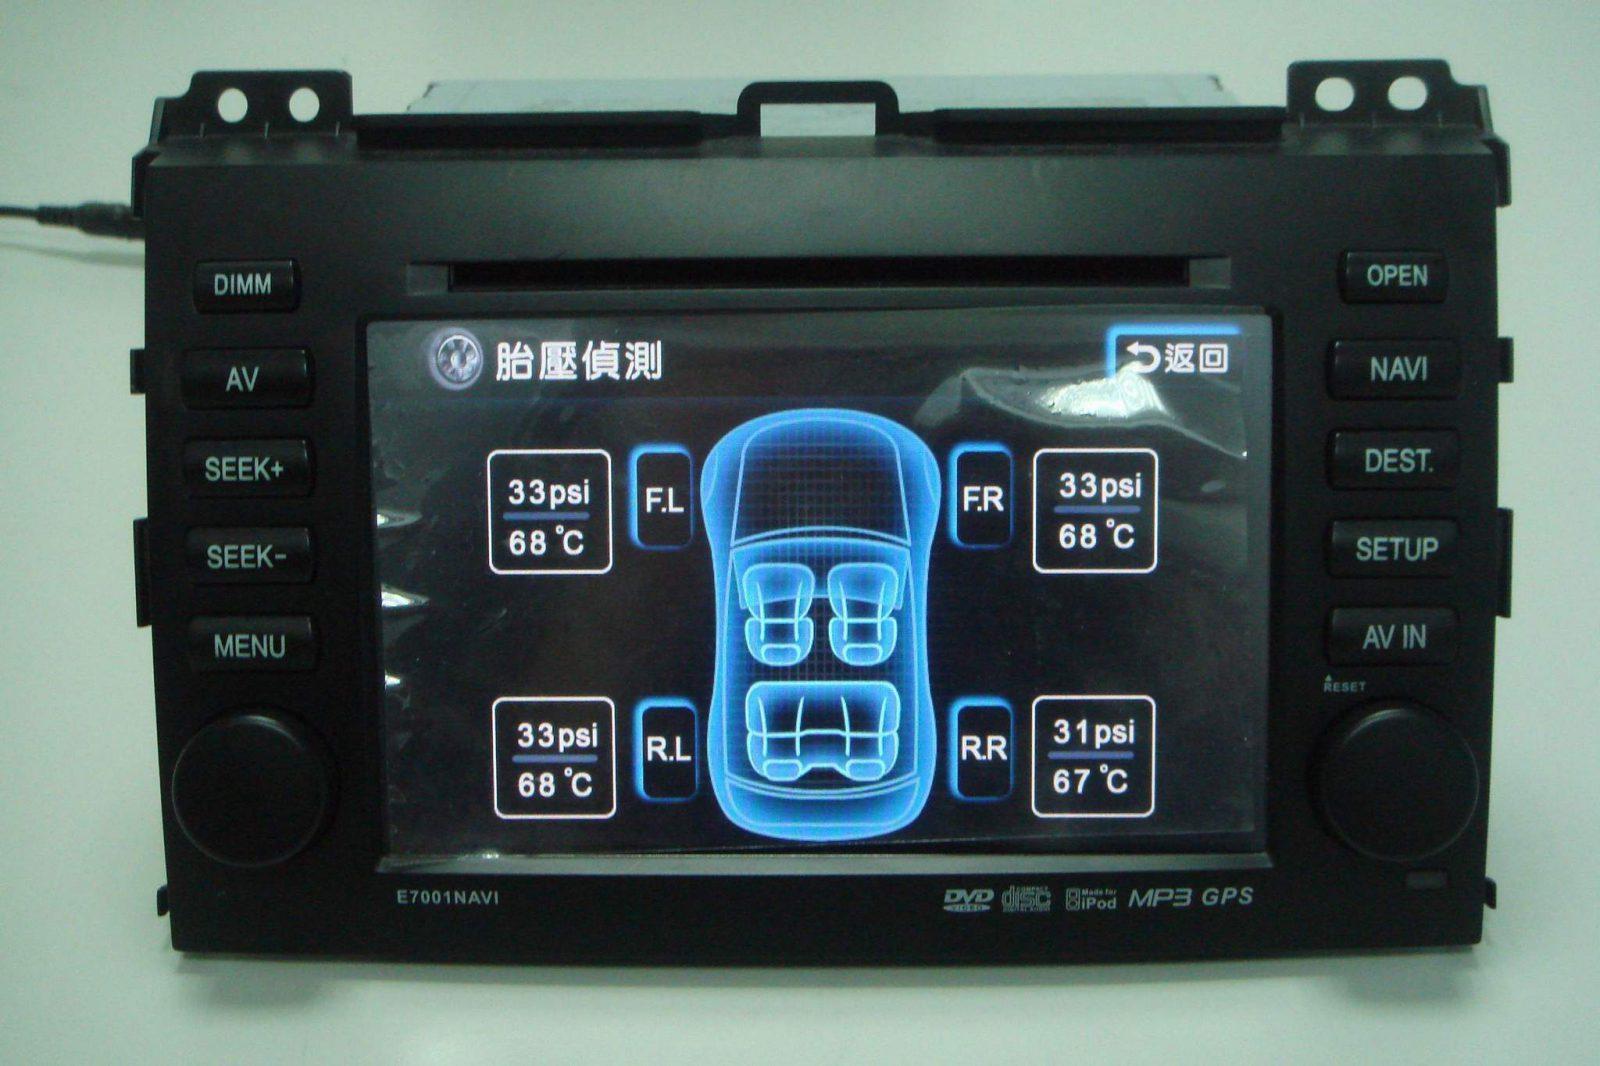 tire pressure monitoring system